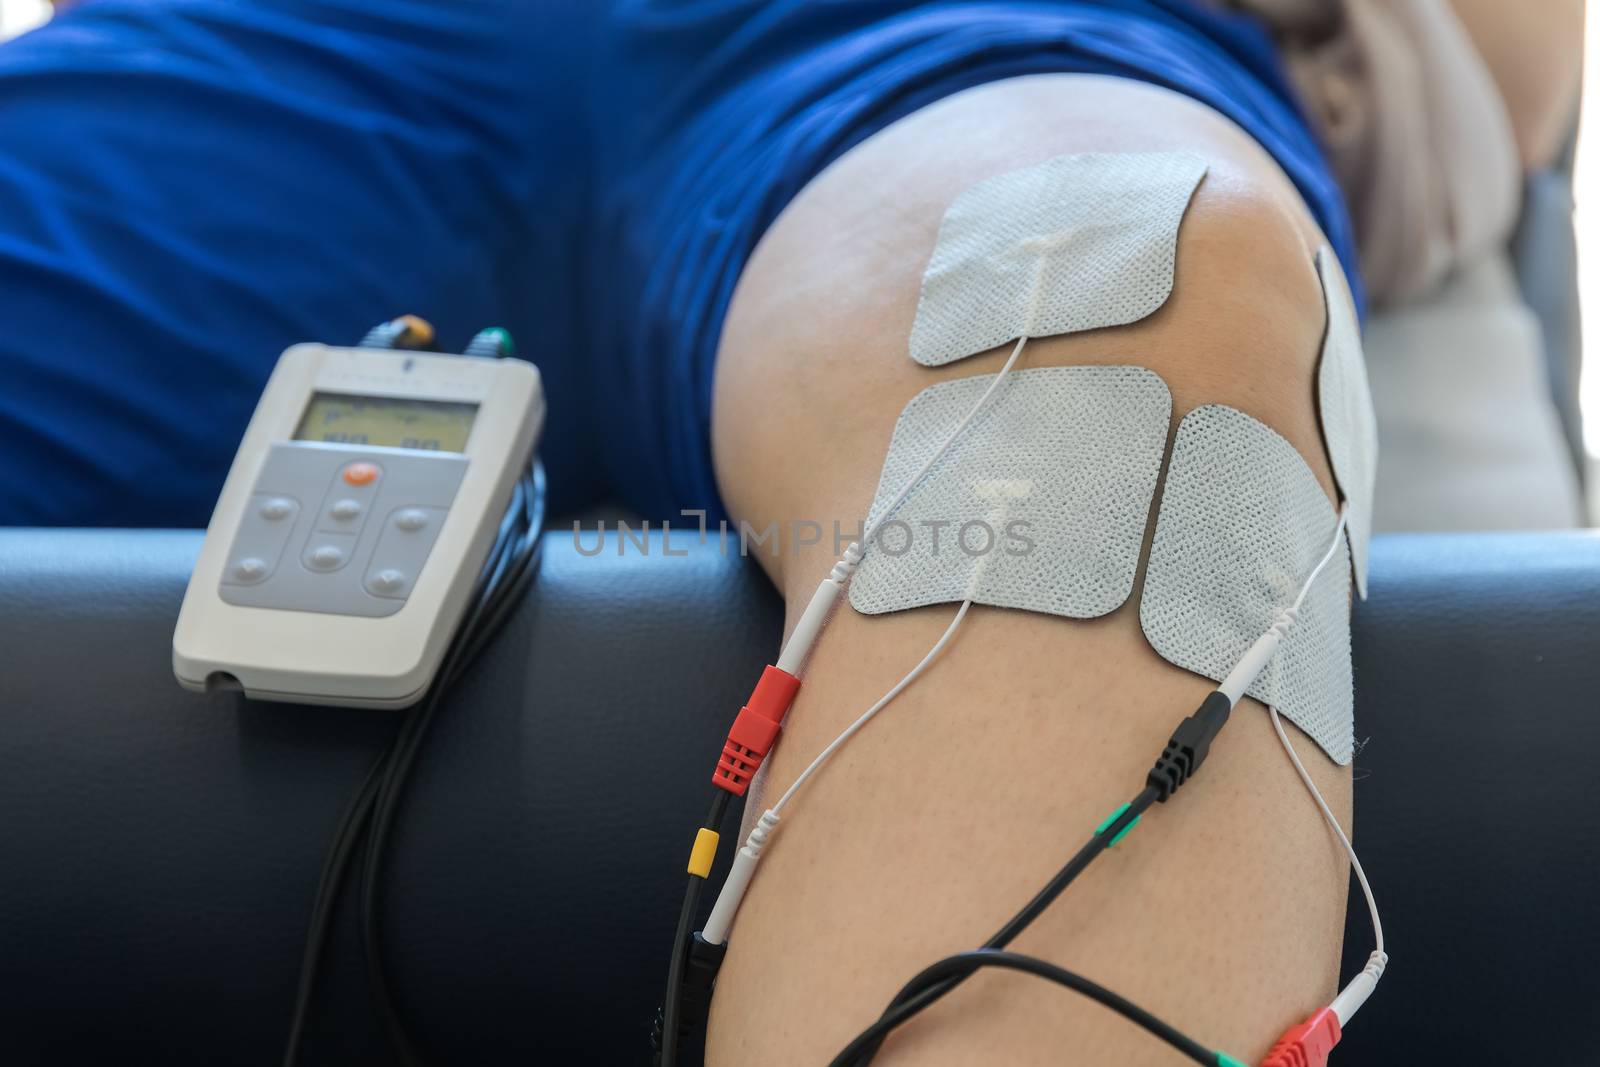 electronic therapy on knee used to treat pain. selective focus